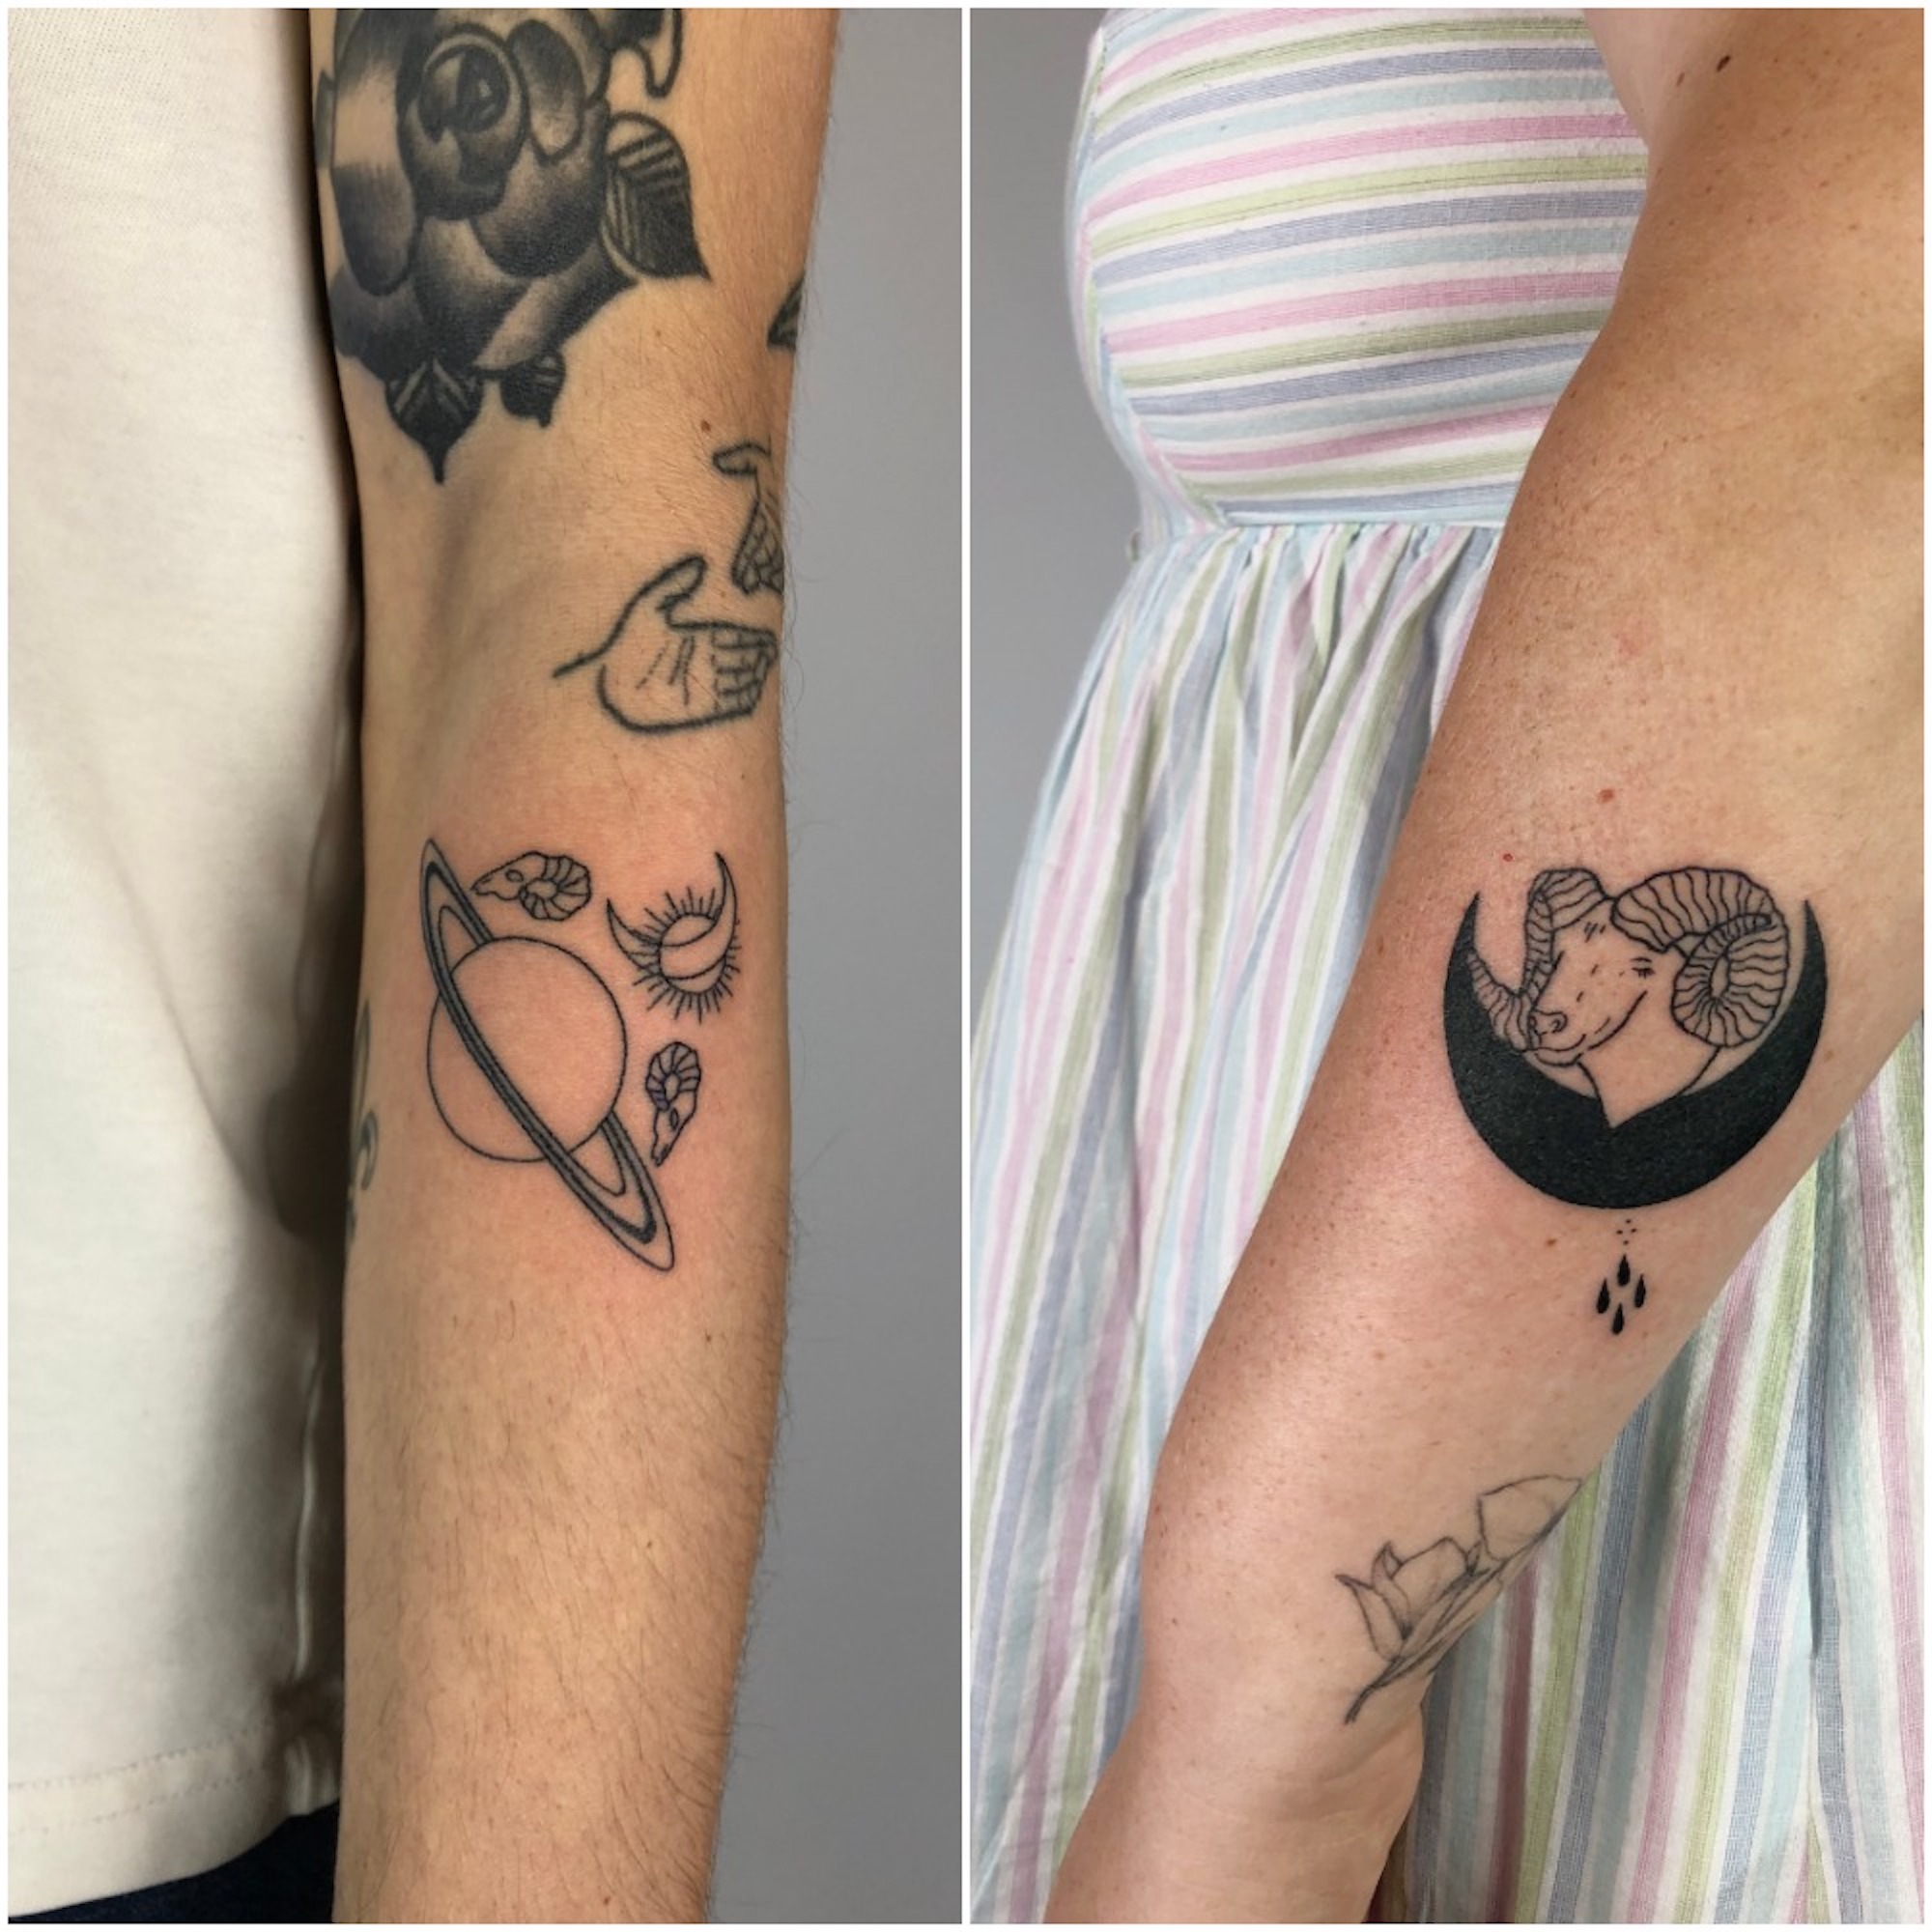 Not Everyones Cup of Tea tattoo by inkbear at royalheartscollective in  Spring City PA  Instagram